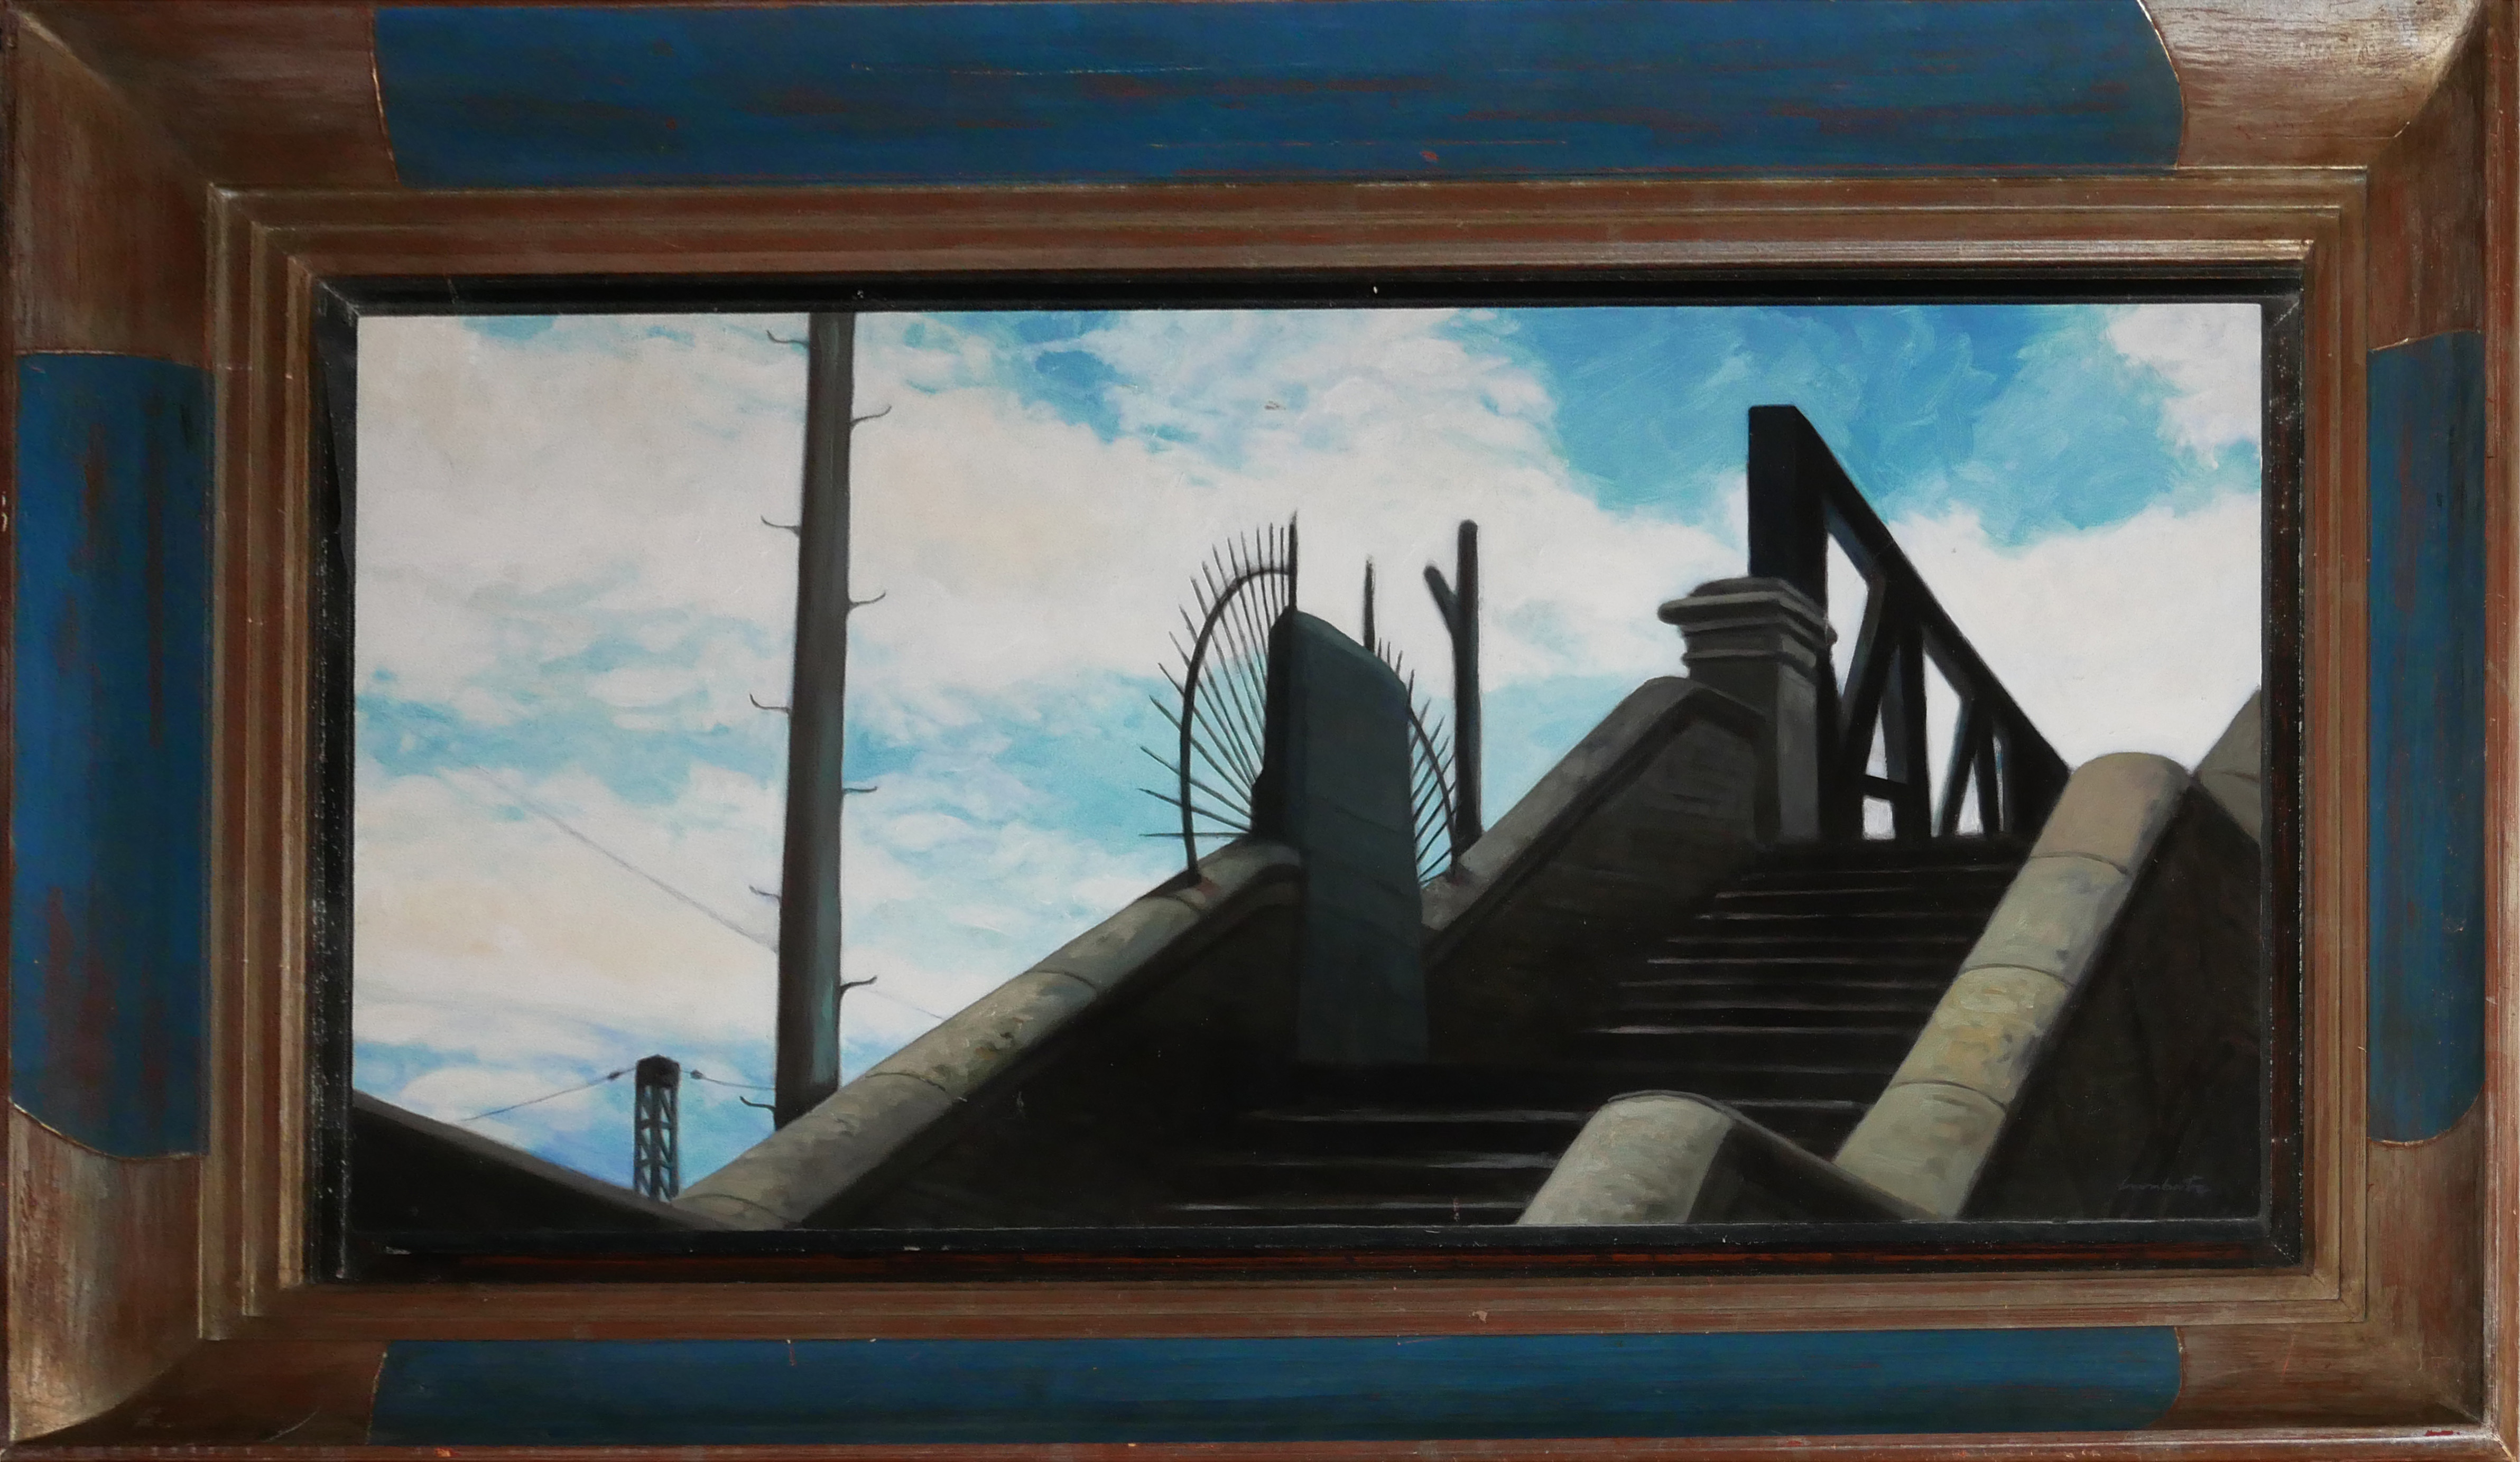 RAMON LOMBARTE, SPANISH, B. 1956, OIL ON PANEL Titled ‘Escaleras Descansos’ (Stairs and Landings), - Image 2 of 4